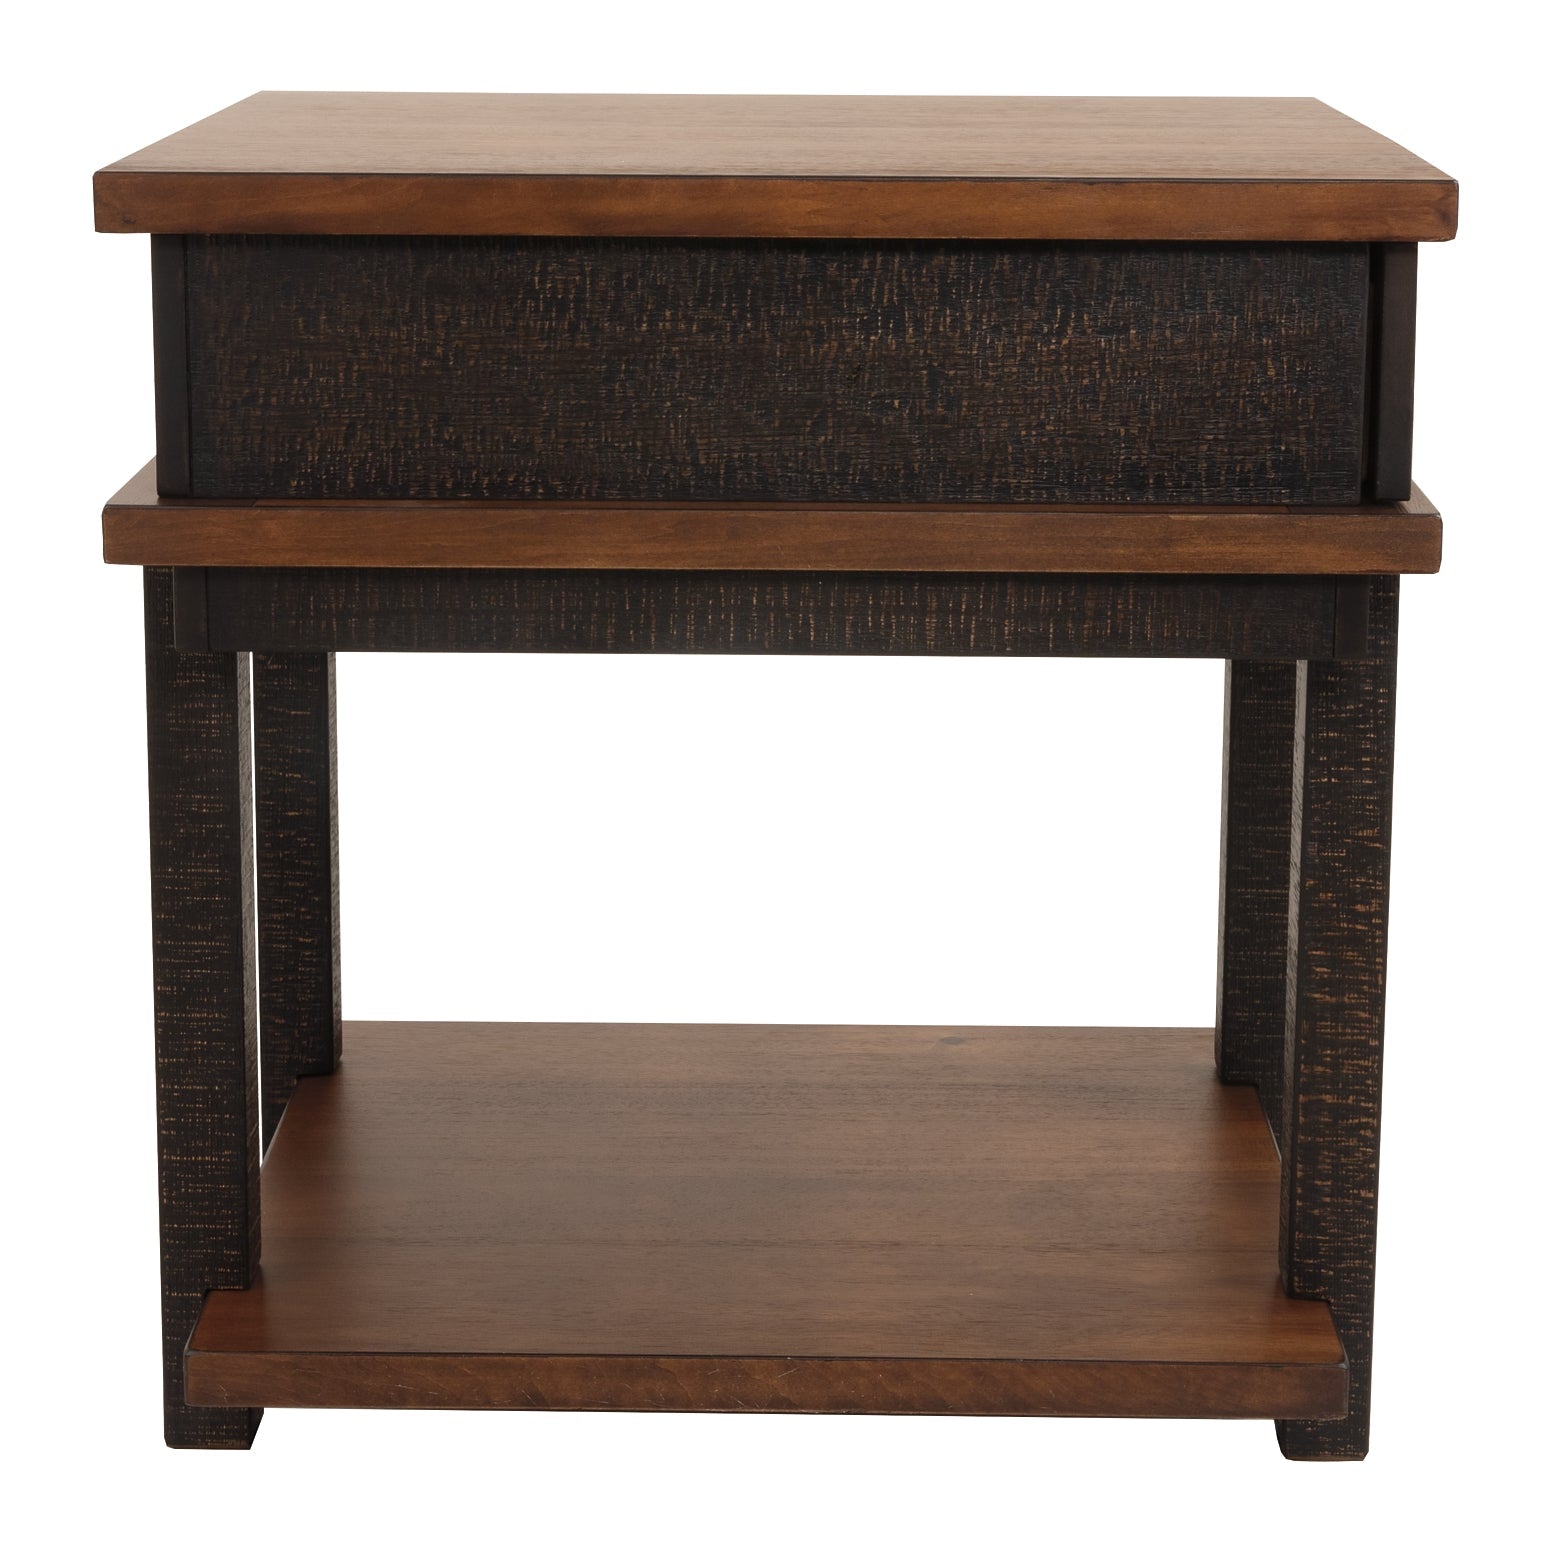 Stanah Rectangular End Table at Walker Mattress and Furniture Locations in Cedar Park and Belton TX.